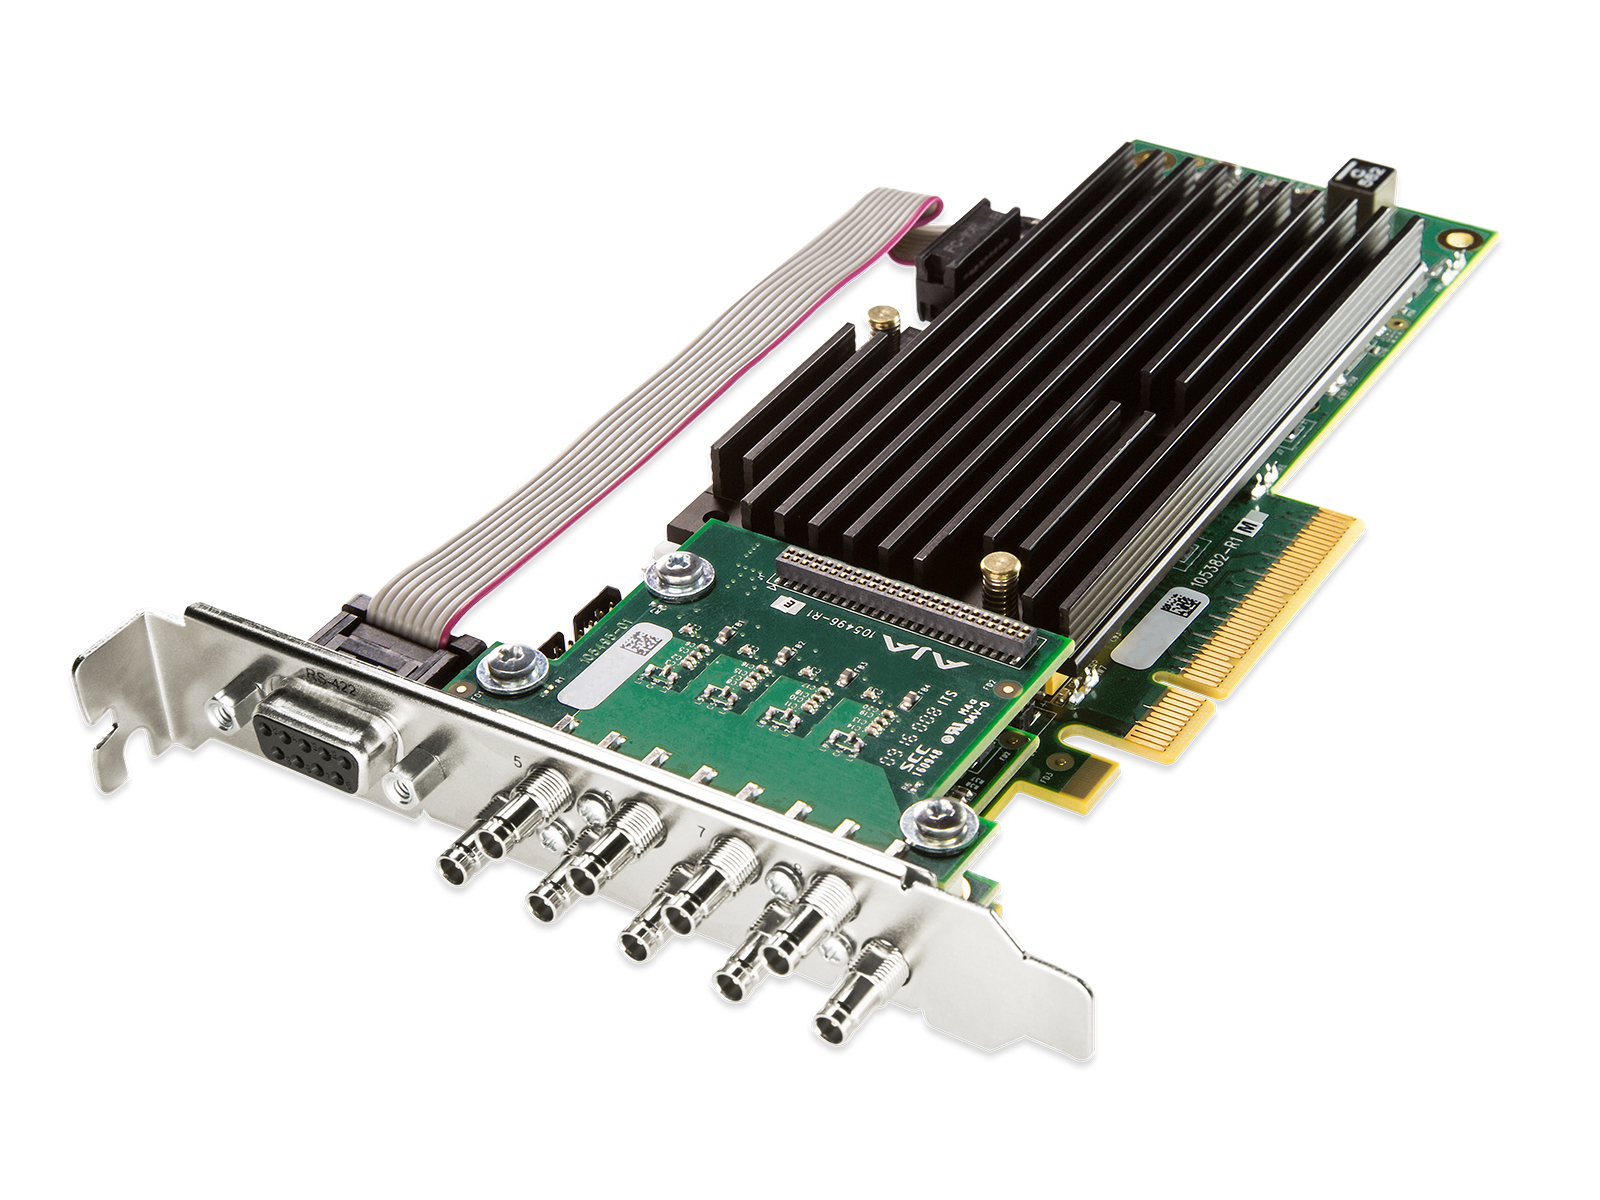 CRV88-9-T-NCF Corvid 88 with Standard Profile PCIe Bracket and Passive Heat Sink/No Cables by AJA